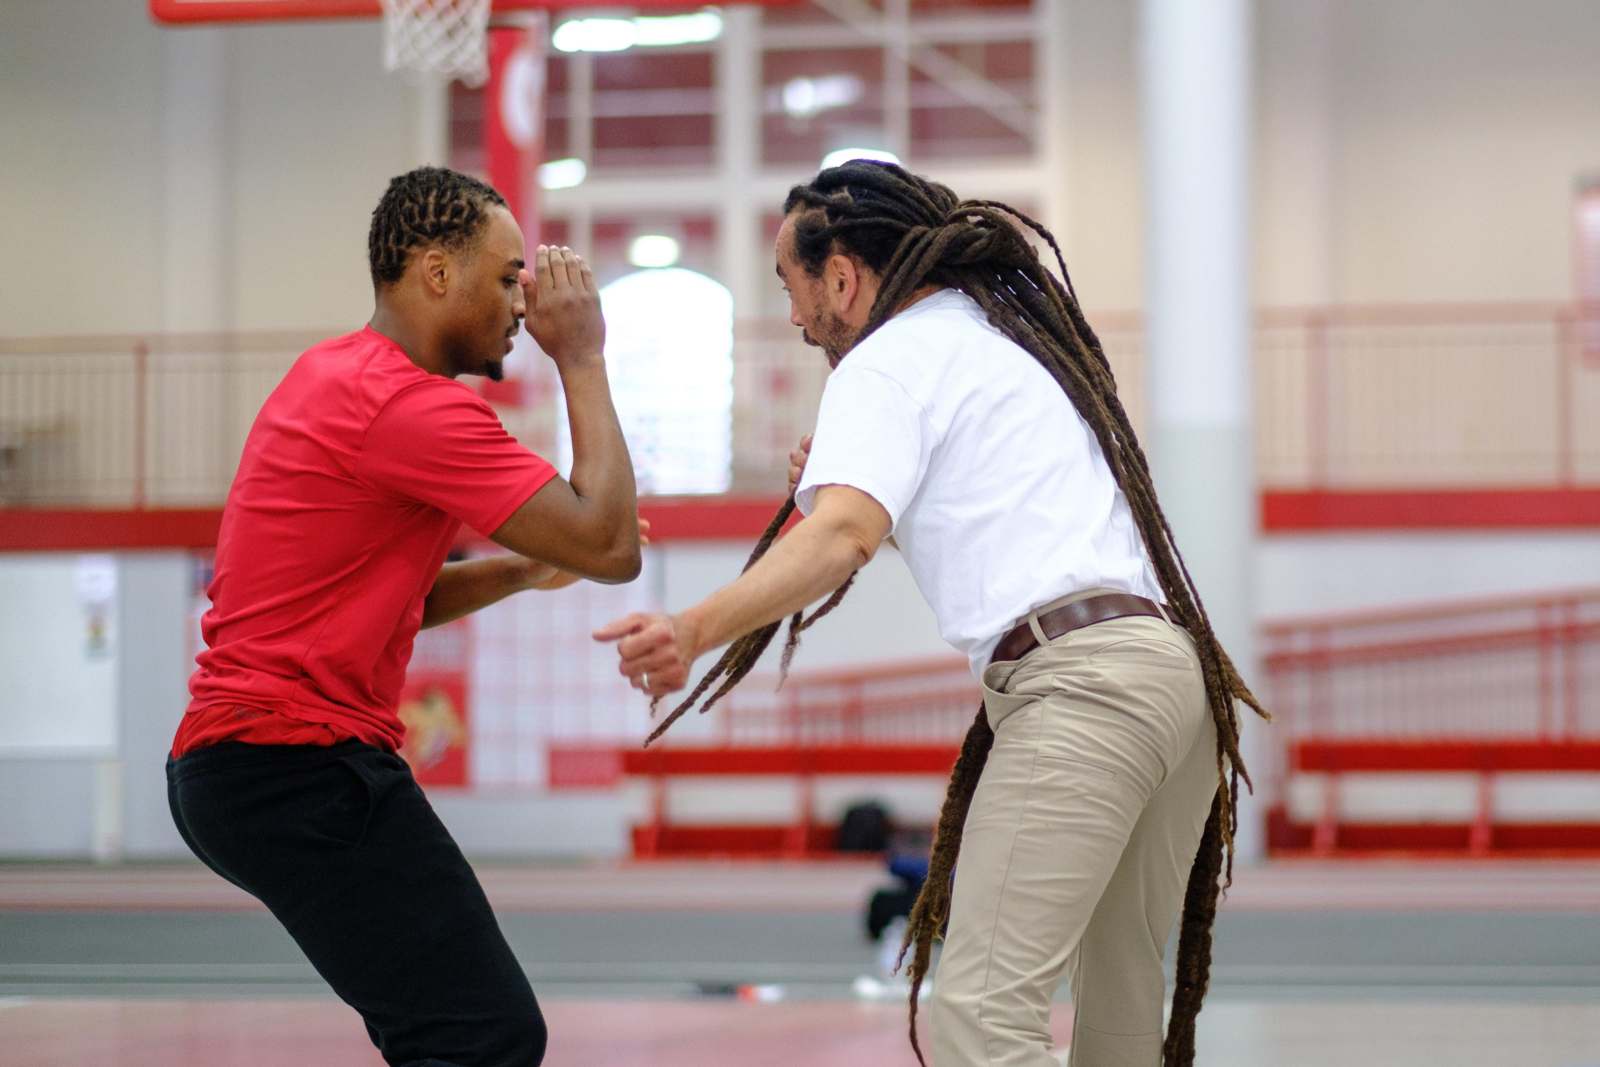 a man with long dreadlocks holding another man's face